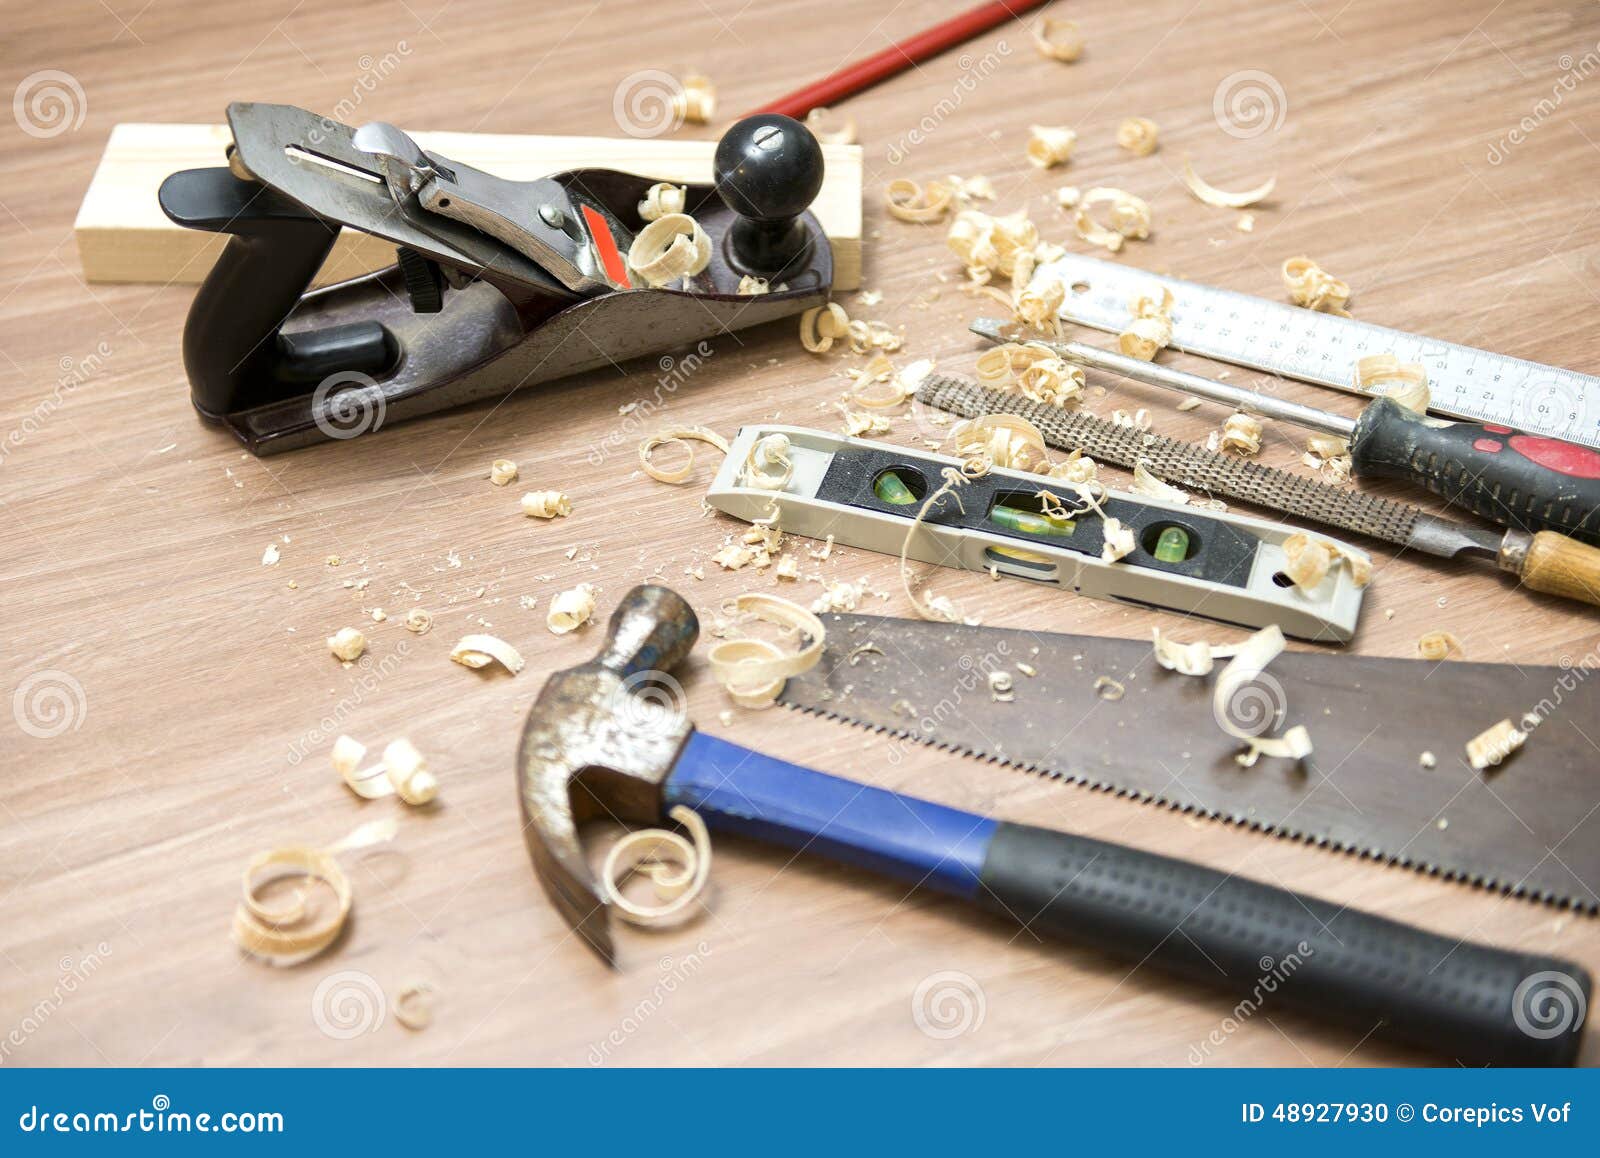 Carpentry Tools And Wood Shavings On Floor Stock Photo Image Of